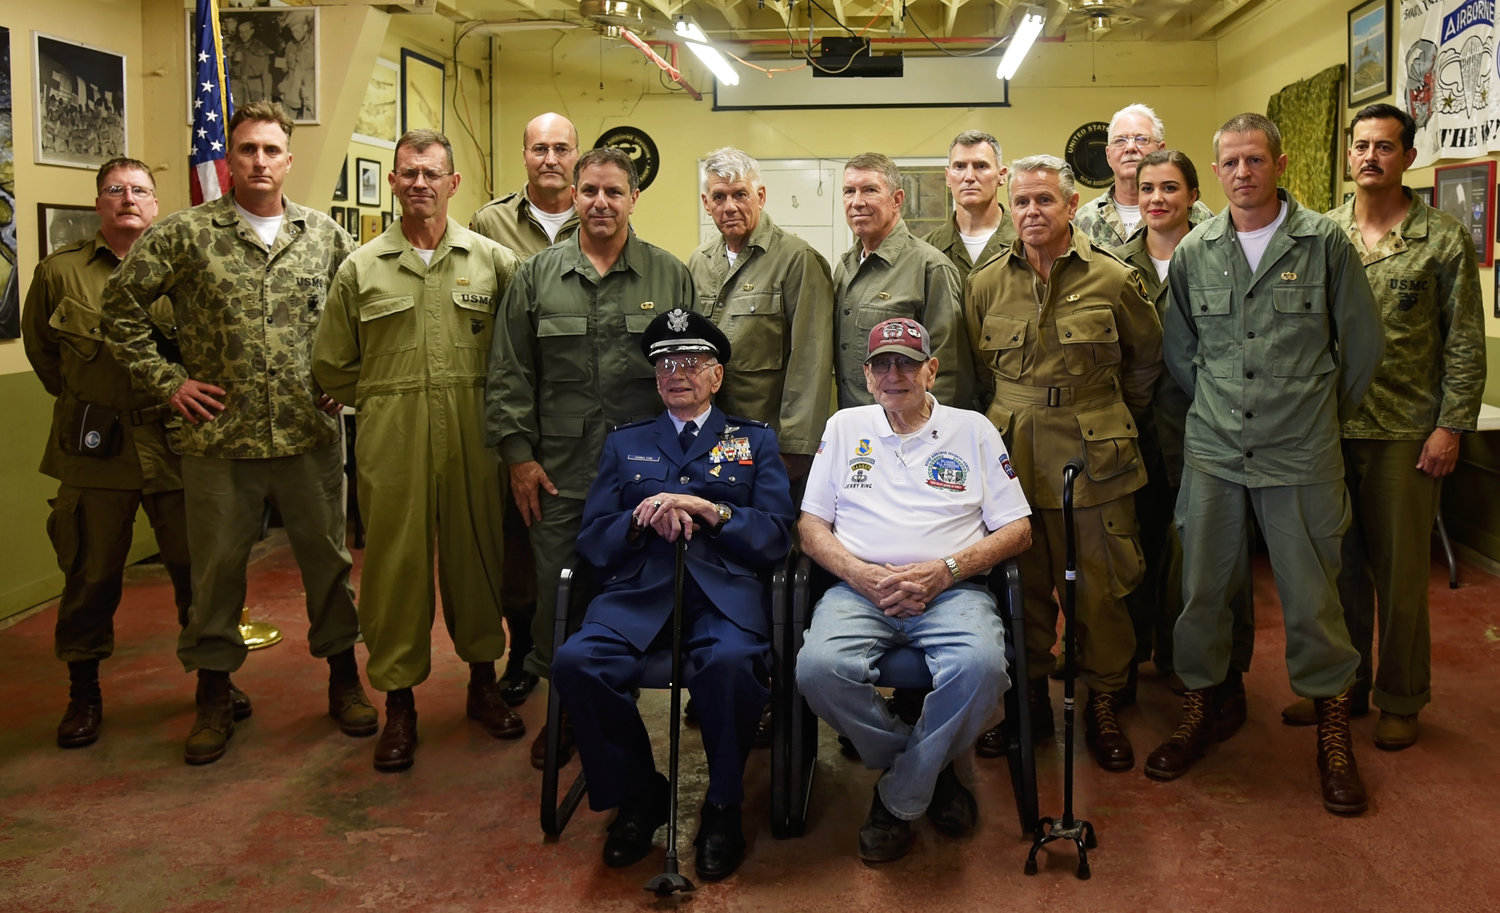 LTC Dave Hamilton (ret.) (front row, left) and veteran Jerry Ring (front row, right) are pictured with jump school students and WWII Airborne Demonstration Team members.